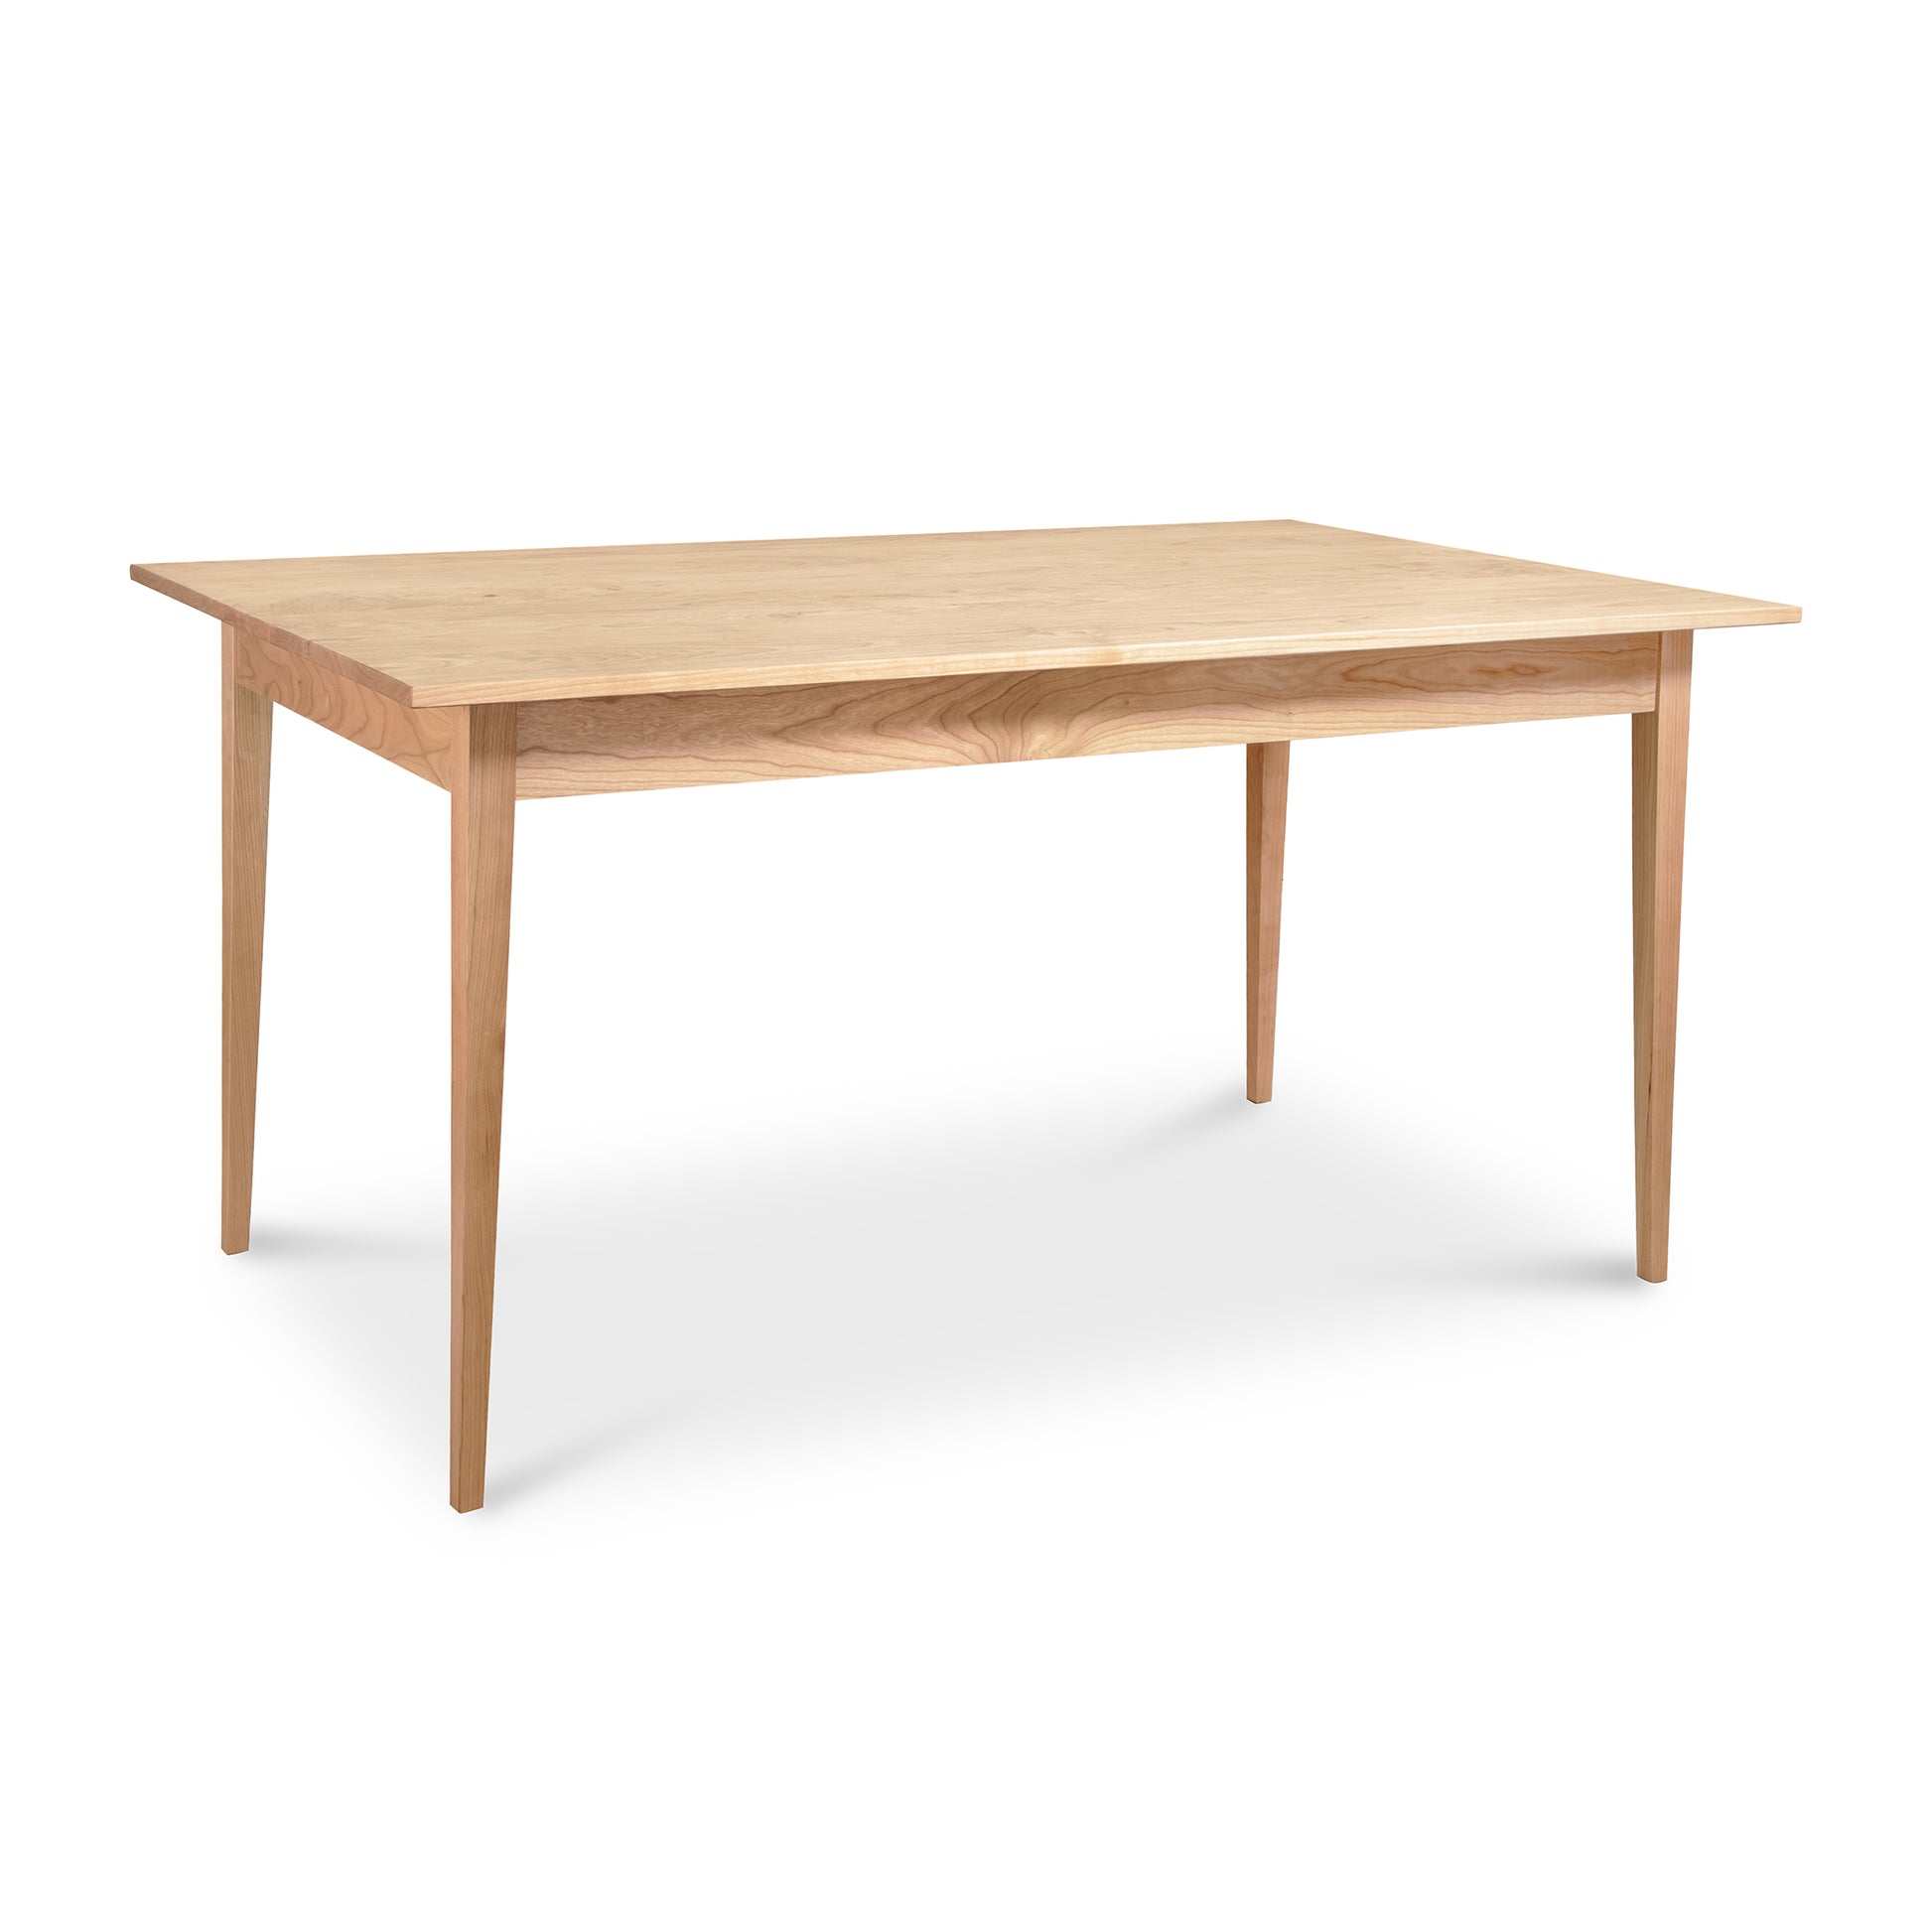 A Vermont Woods Studios Country Shaker Dining Table with a solid natural wood top and legs, available in various wood options.